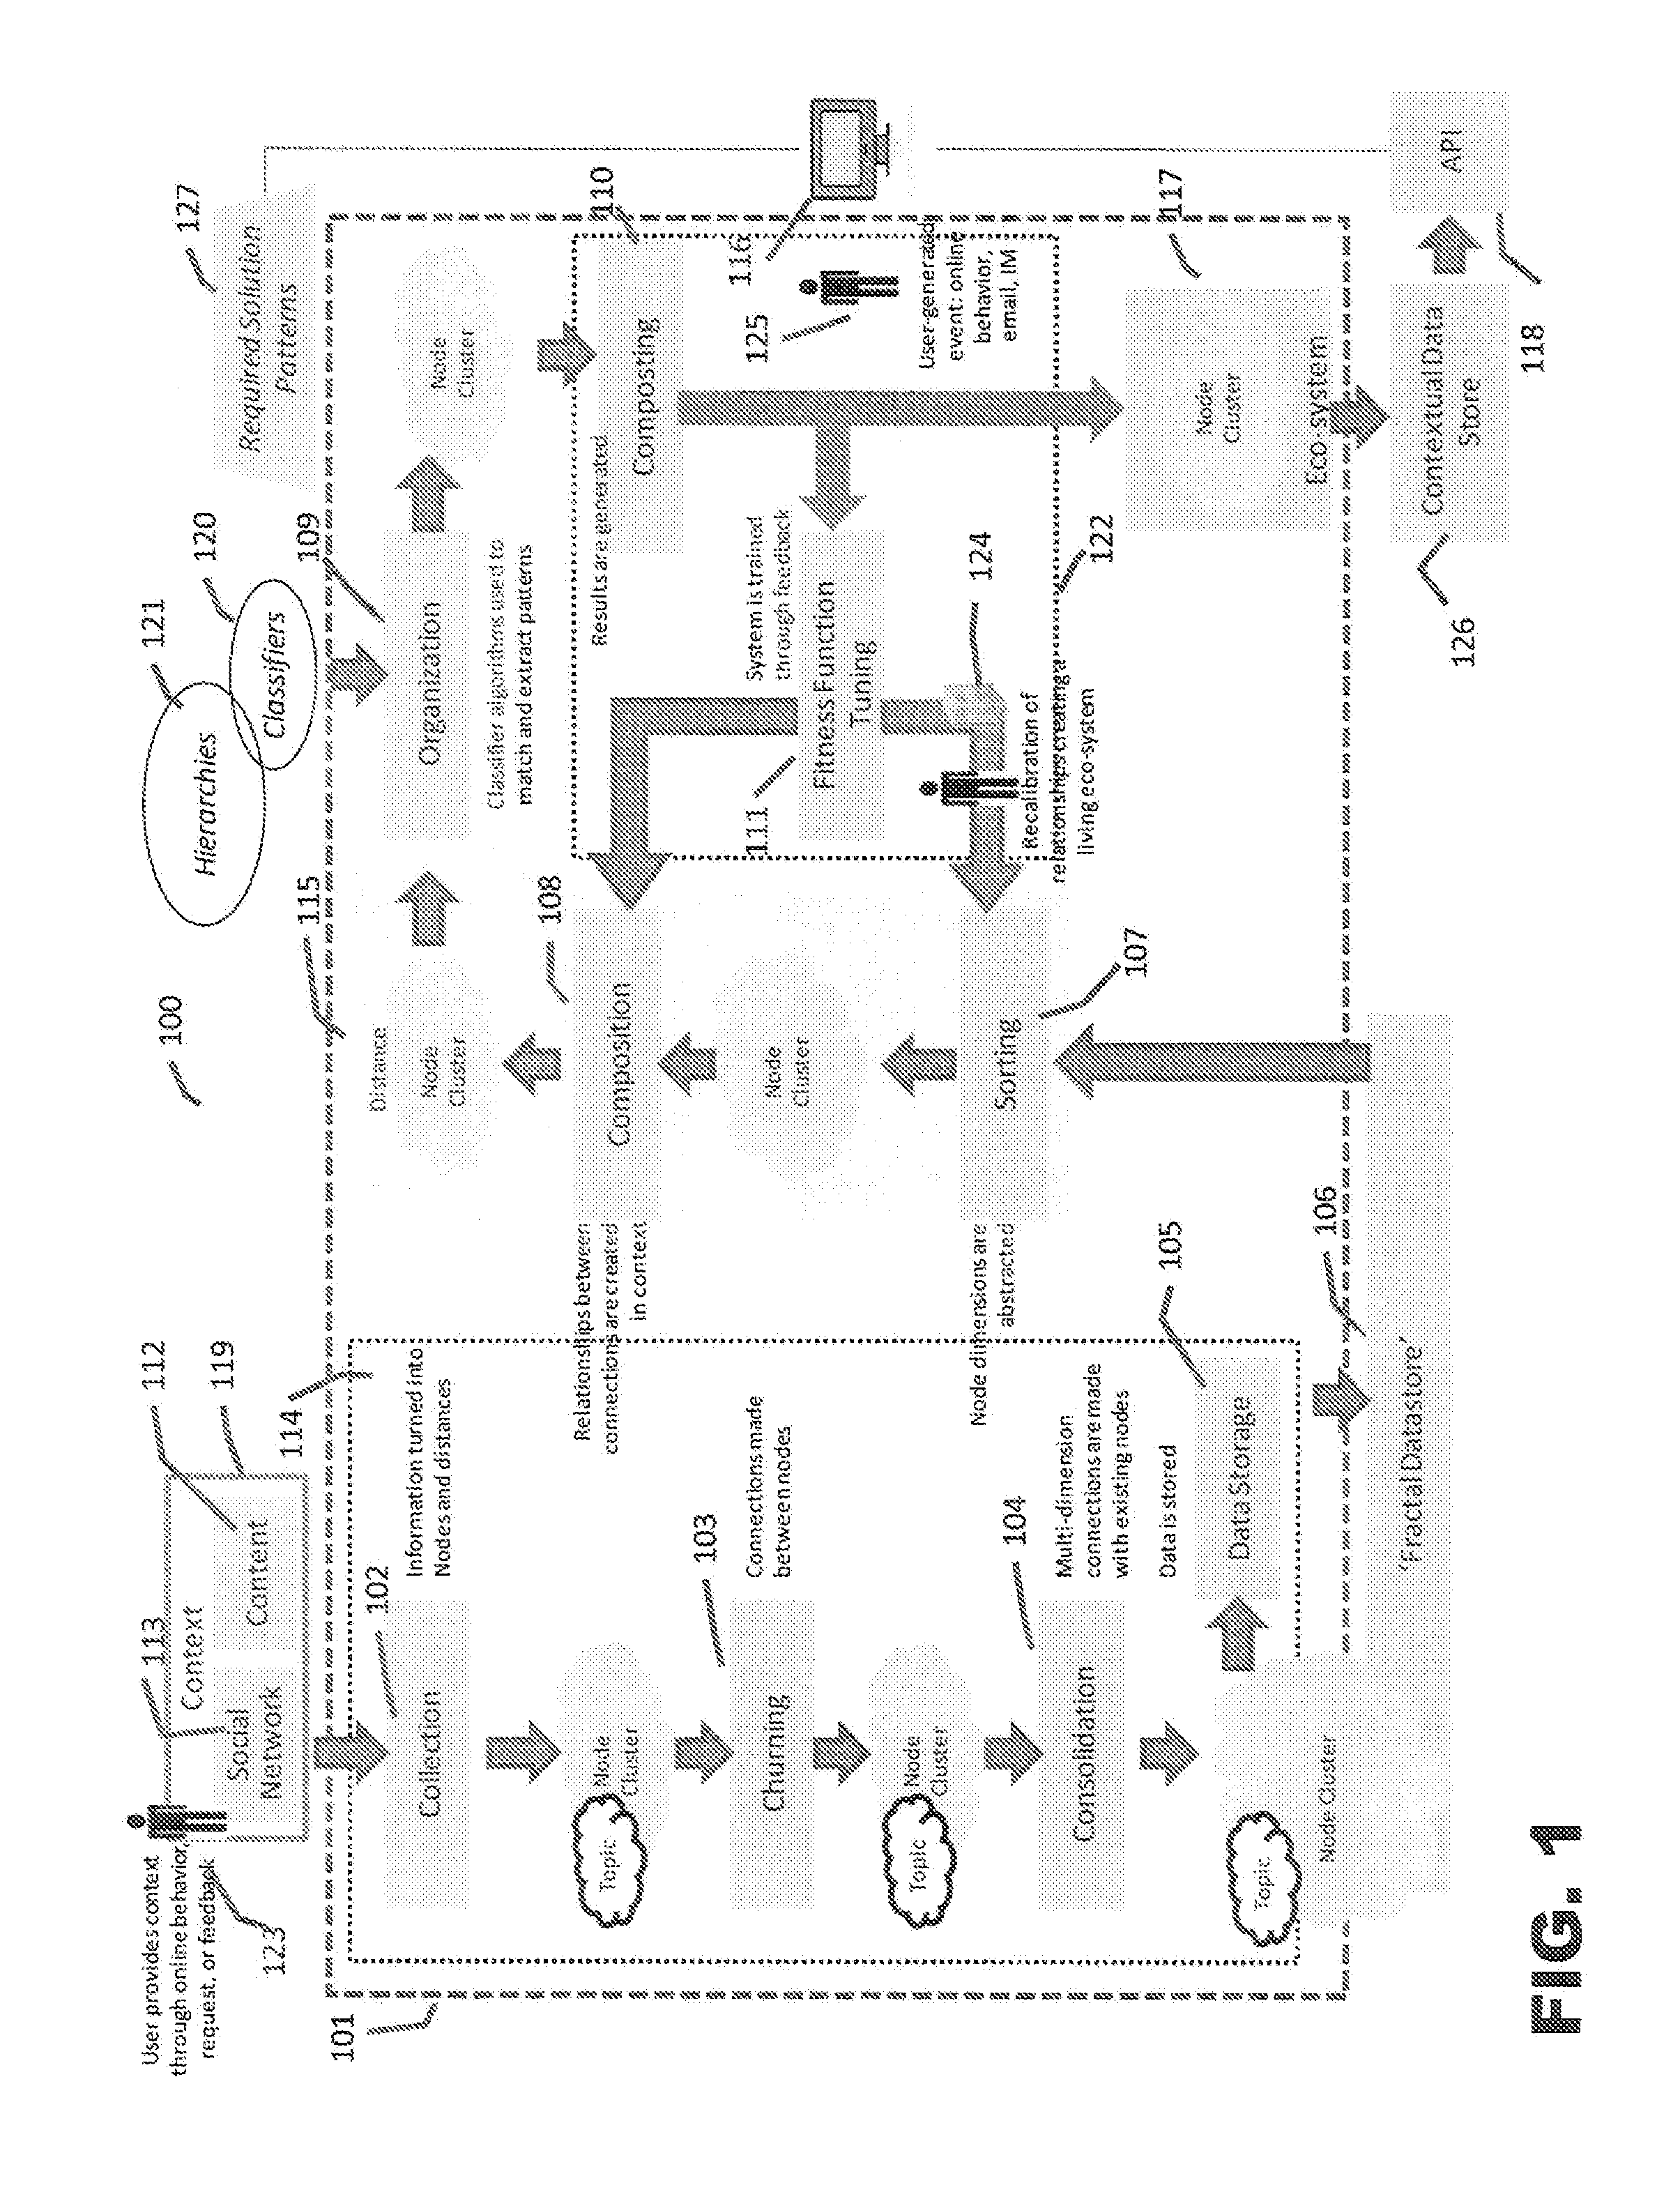 Methods and systems for auto-generating models of networks for network management purposes